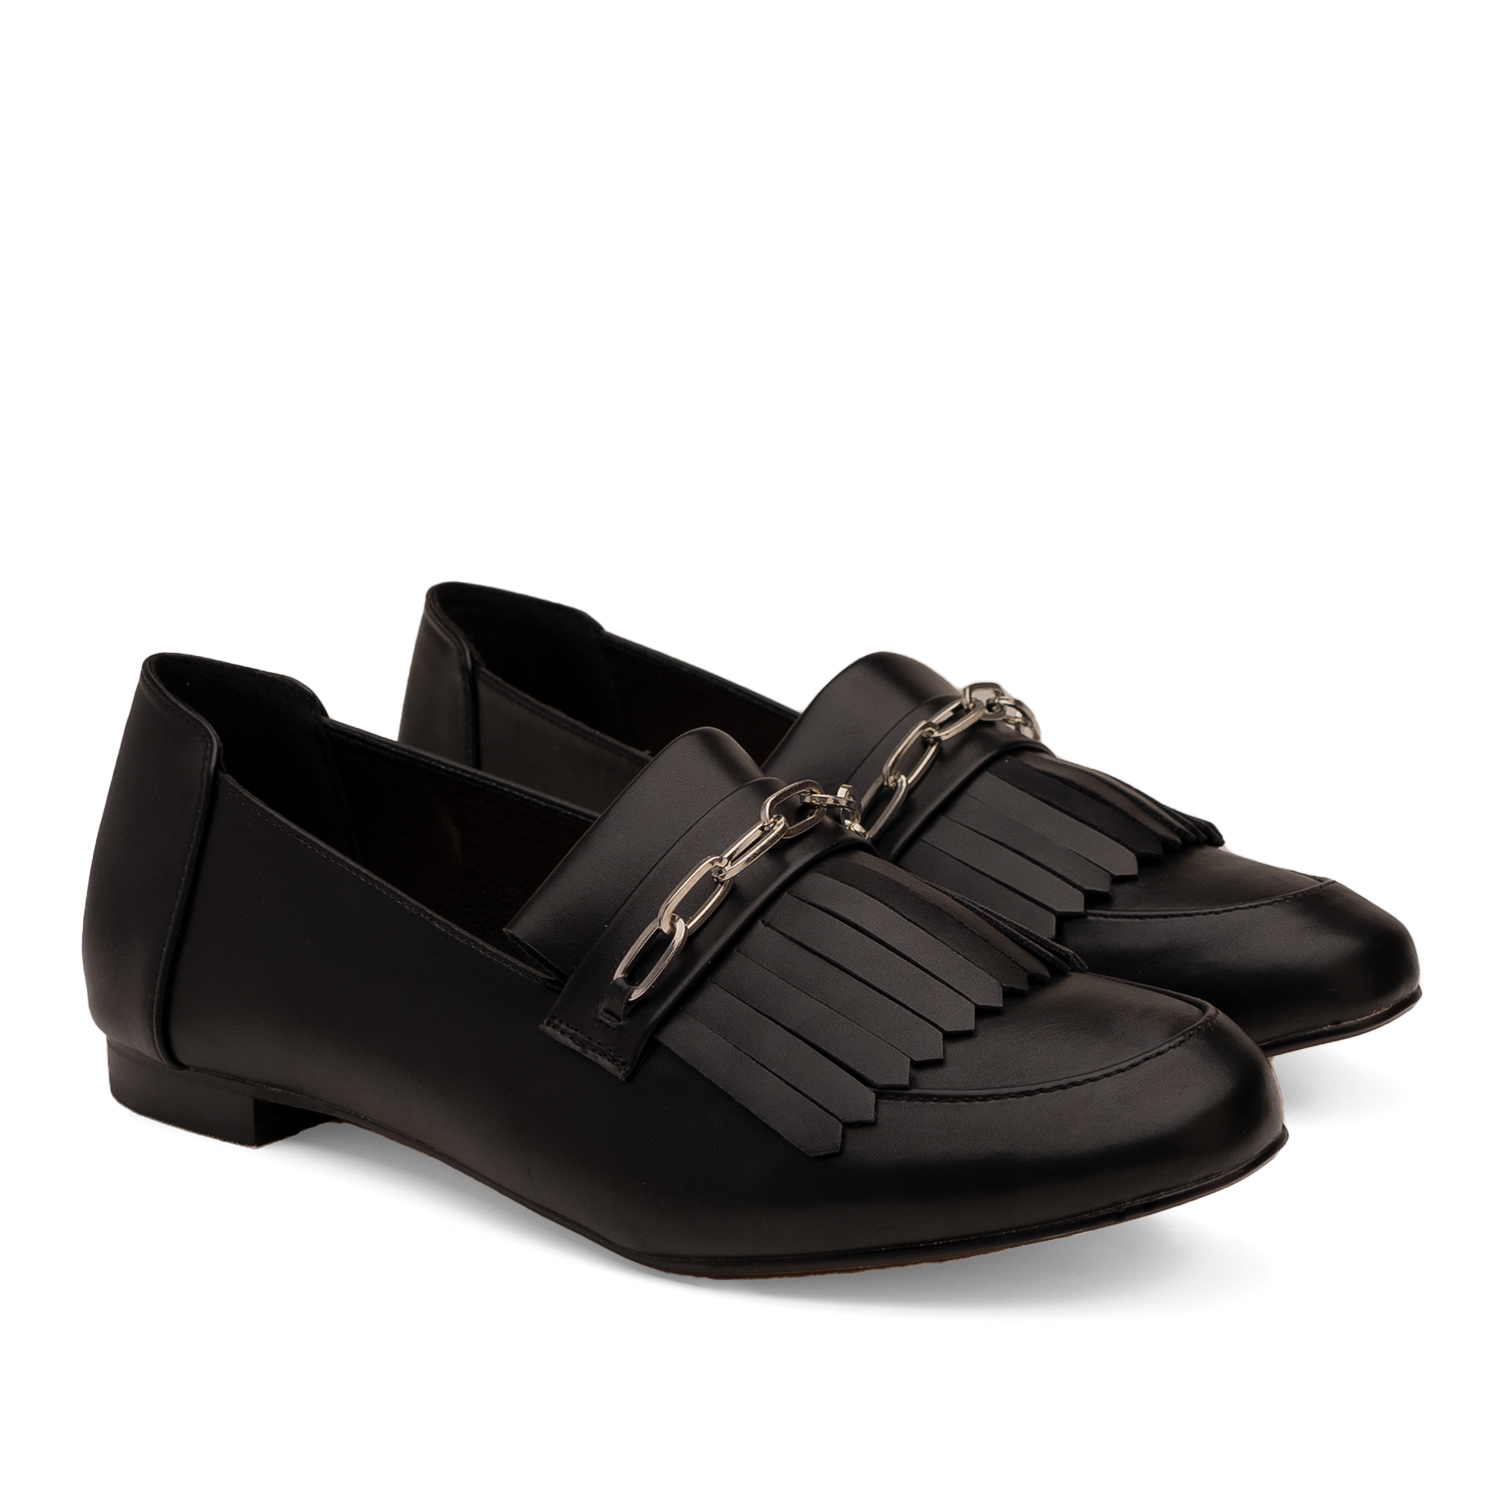 Moccasins in black faux leather and fringe 